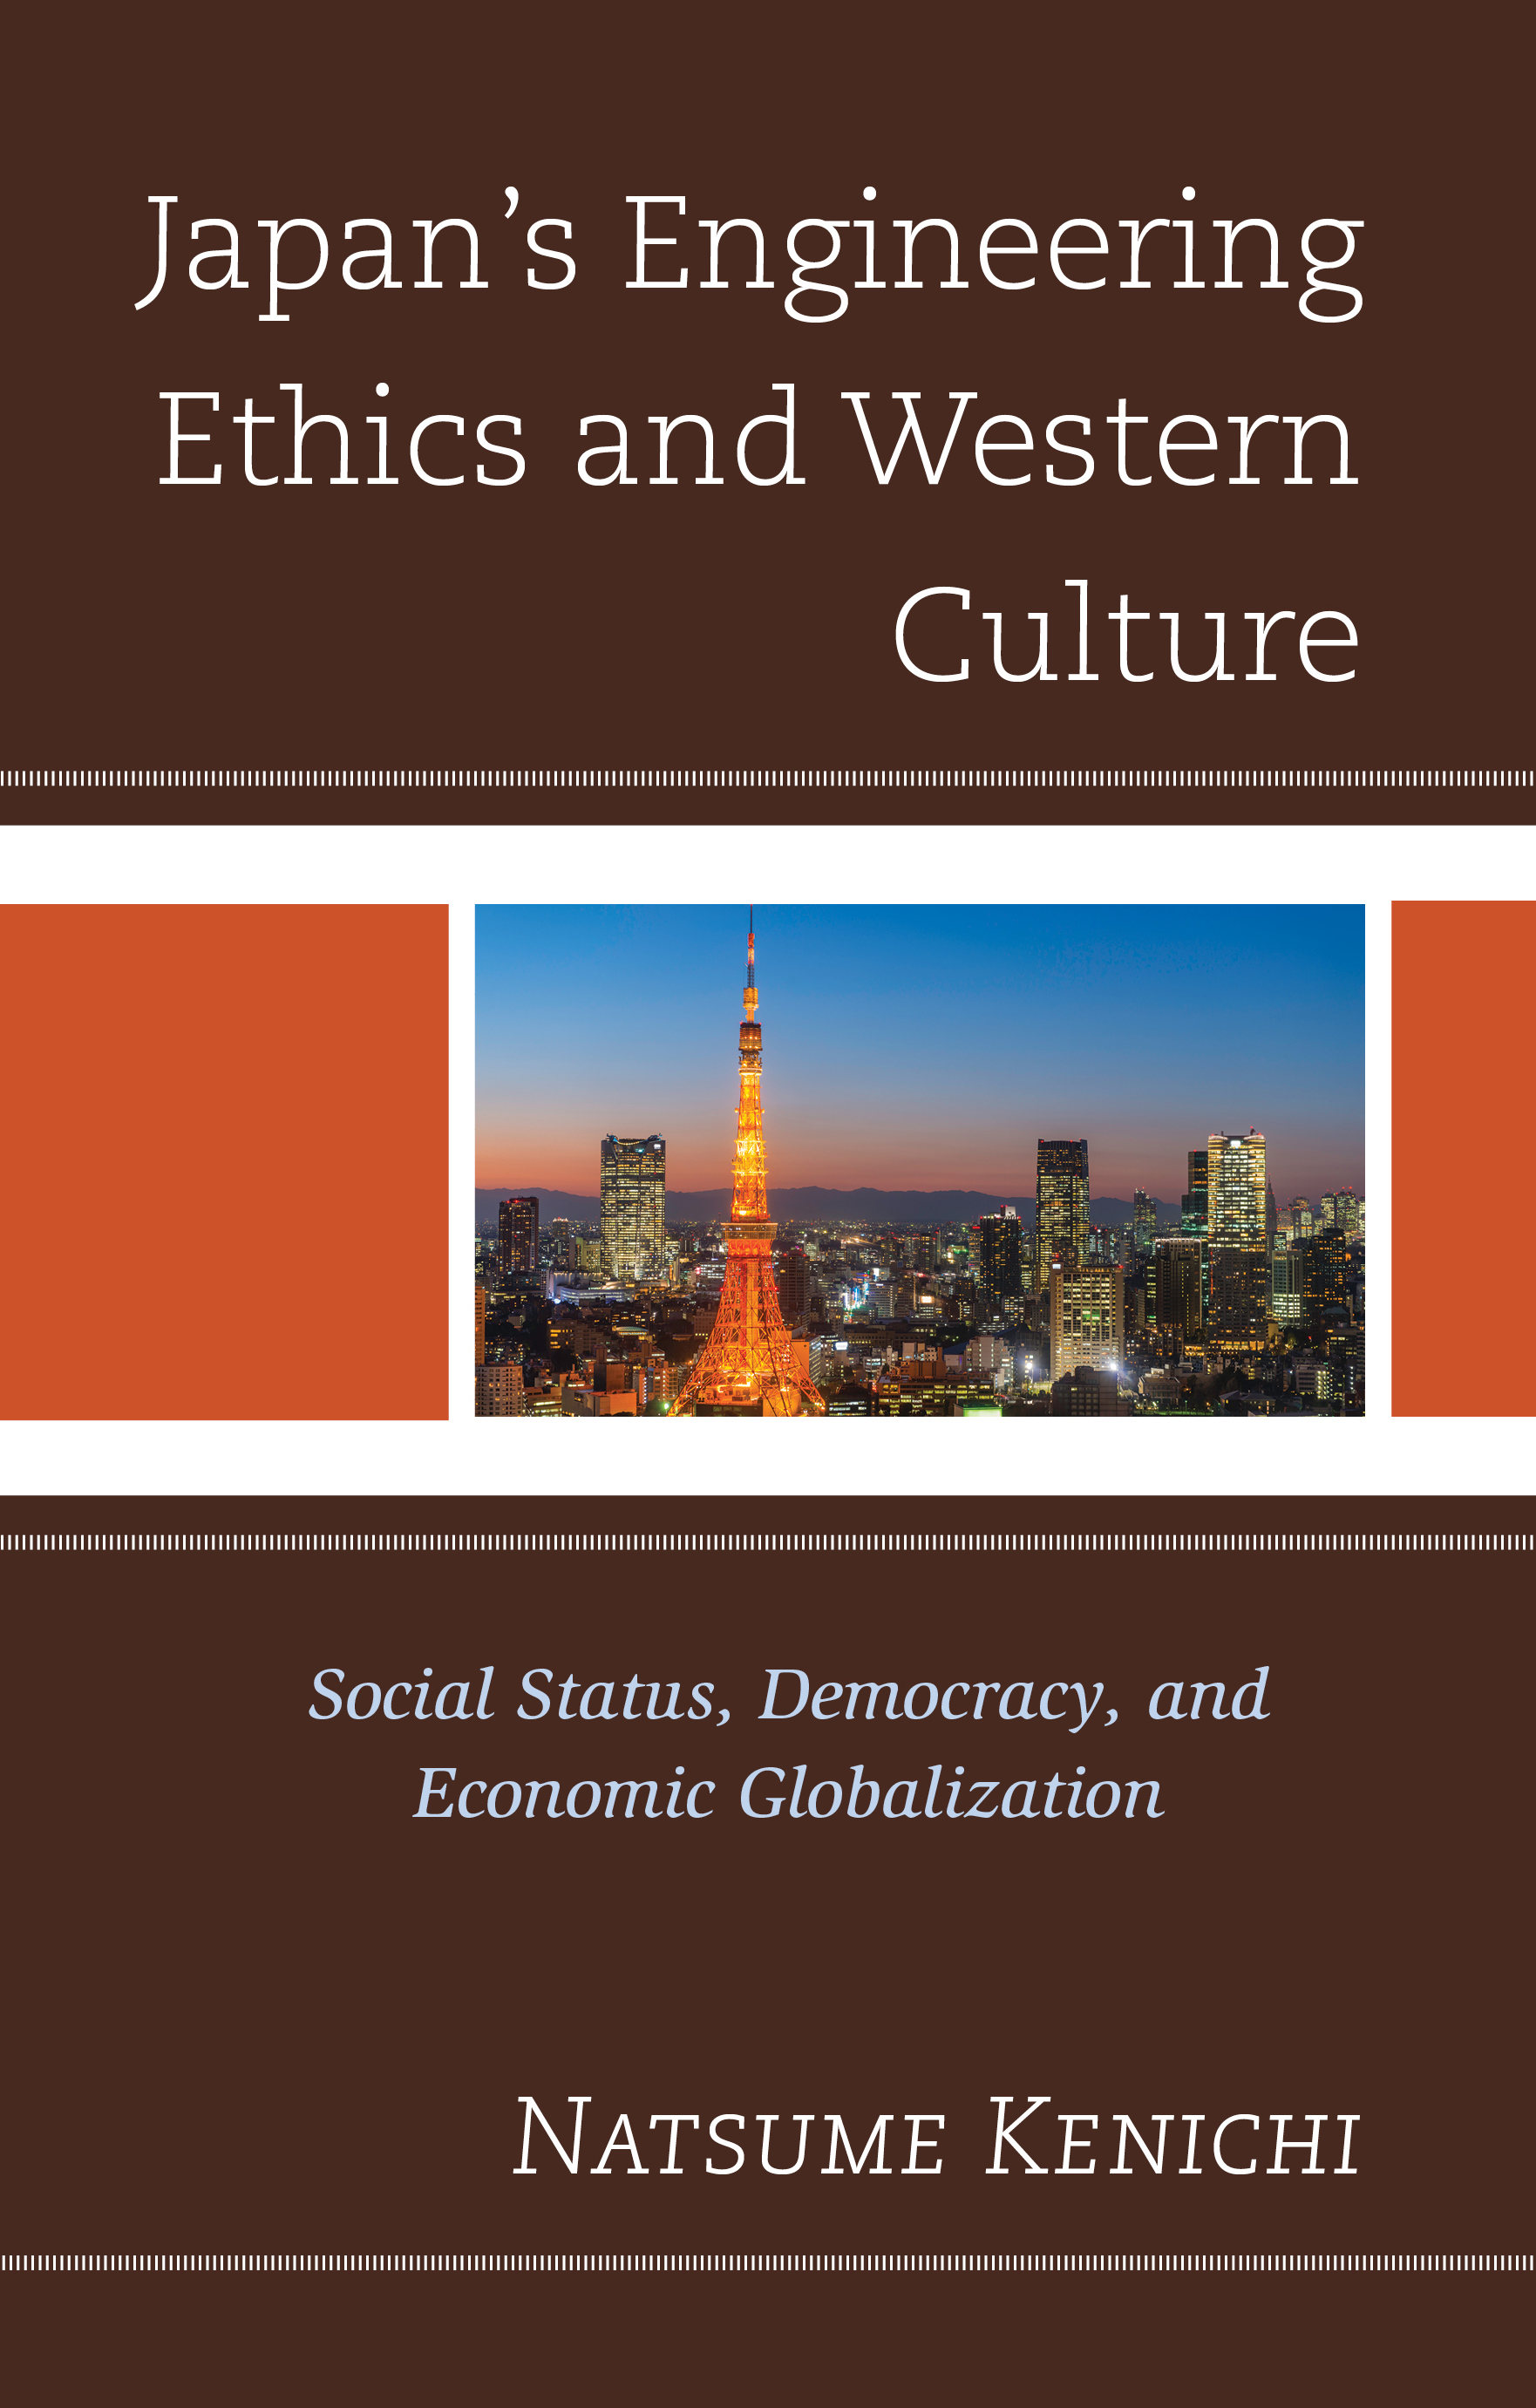 Japan's Engineering Ethics and Western Culture: Social Status, Democracy, and Economic Globalization